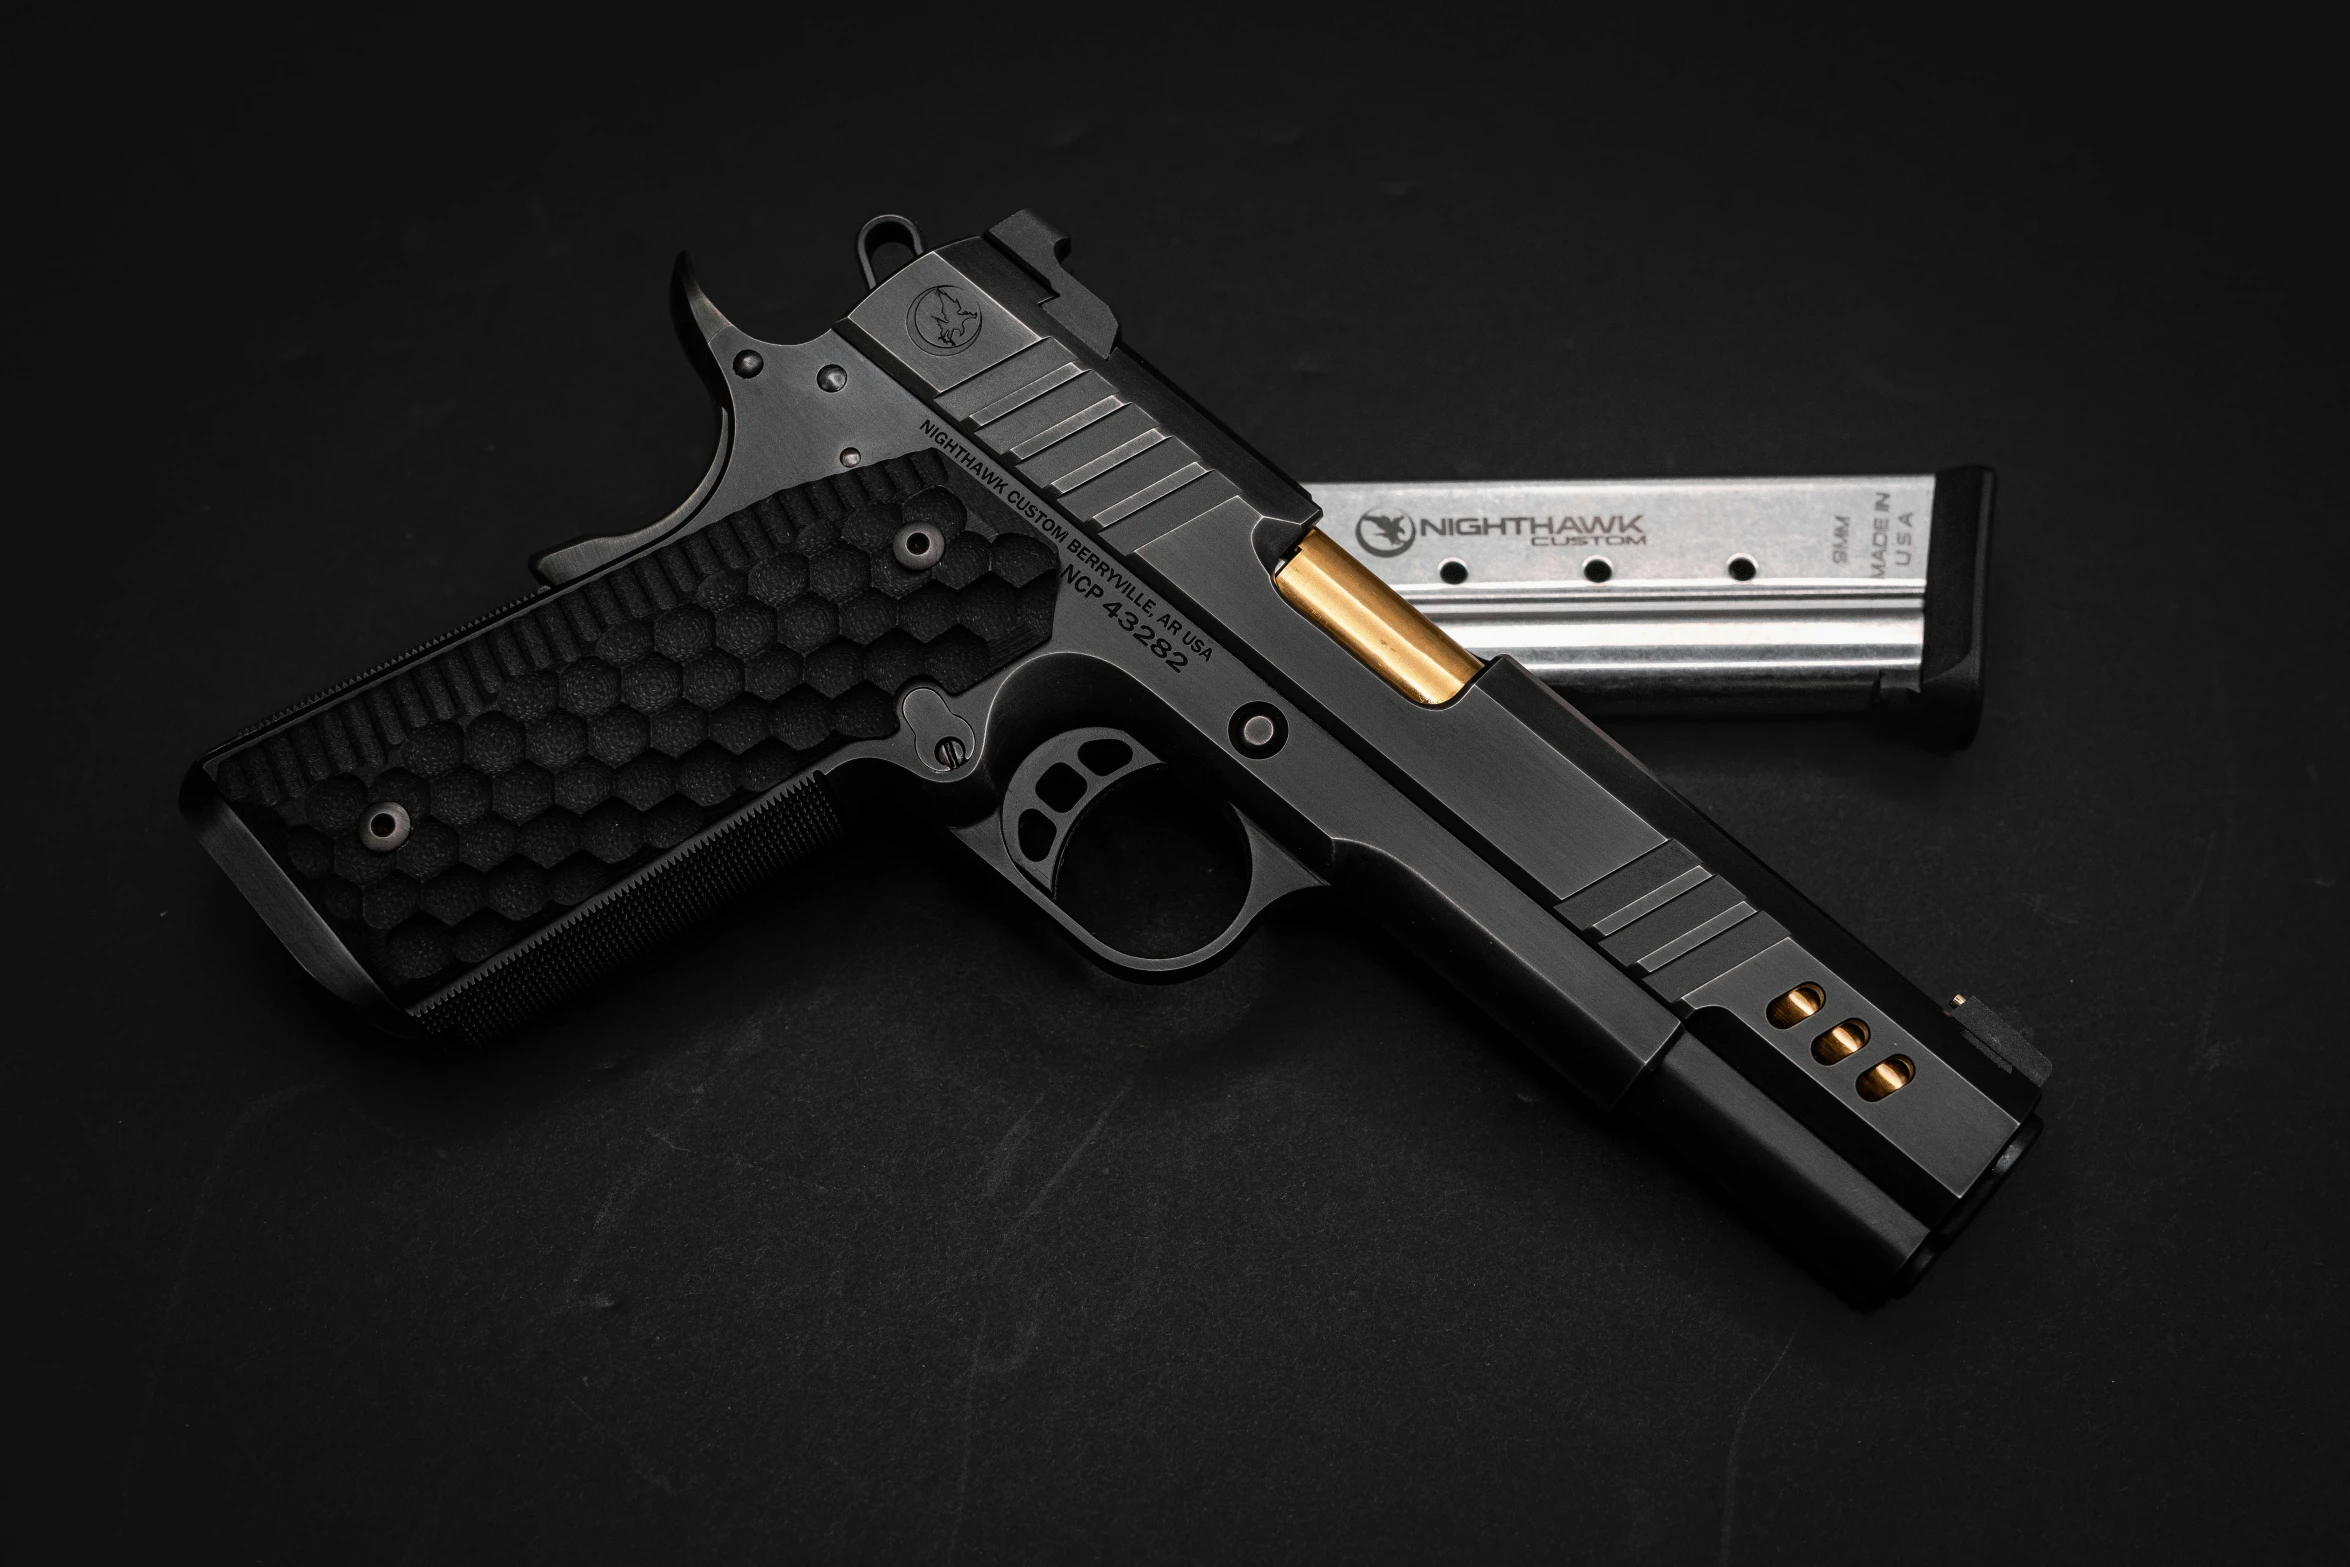 the pistol is displayed with its gold and black grip